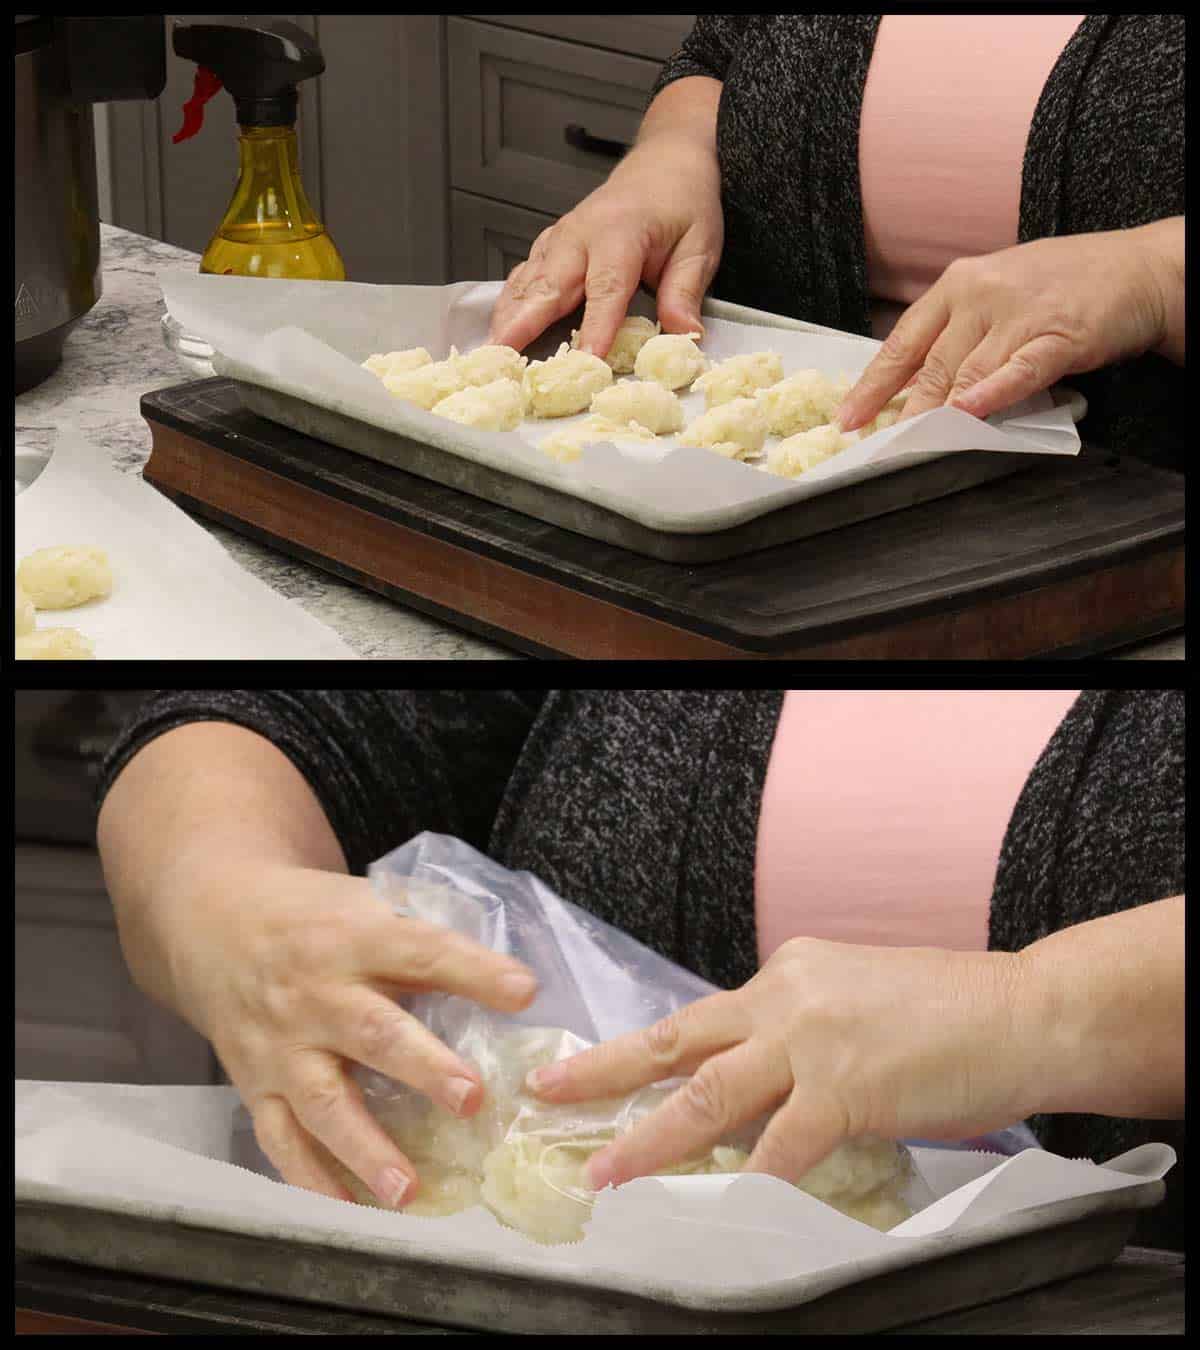 Freezing homemade tater tots on a parchment lined tray and transfering them to a freezer bag after they are frozen.